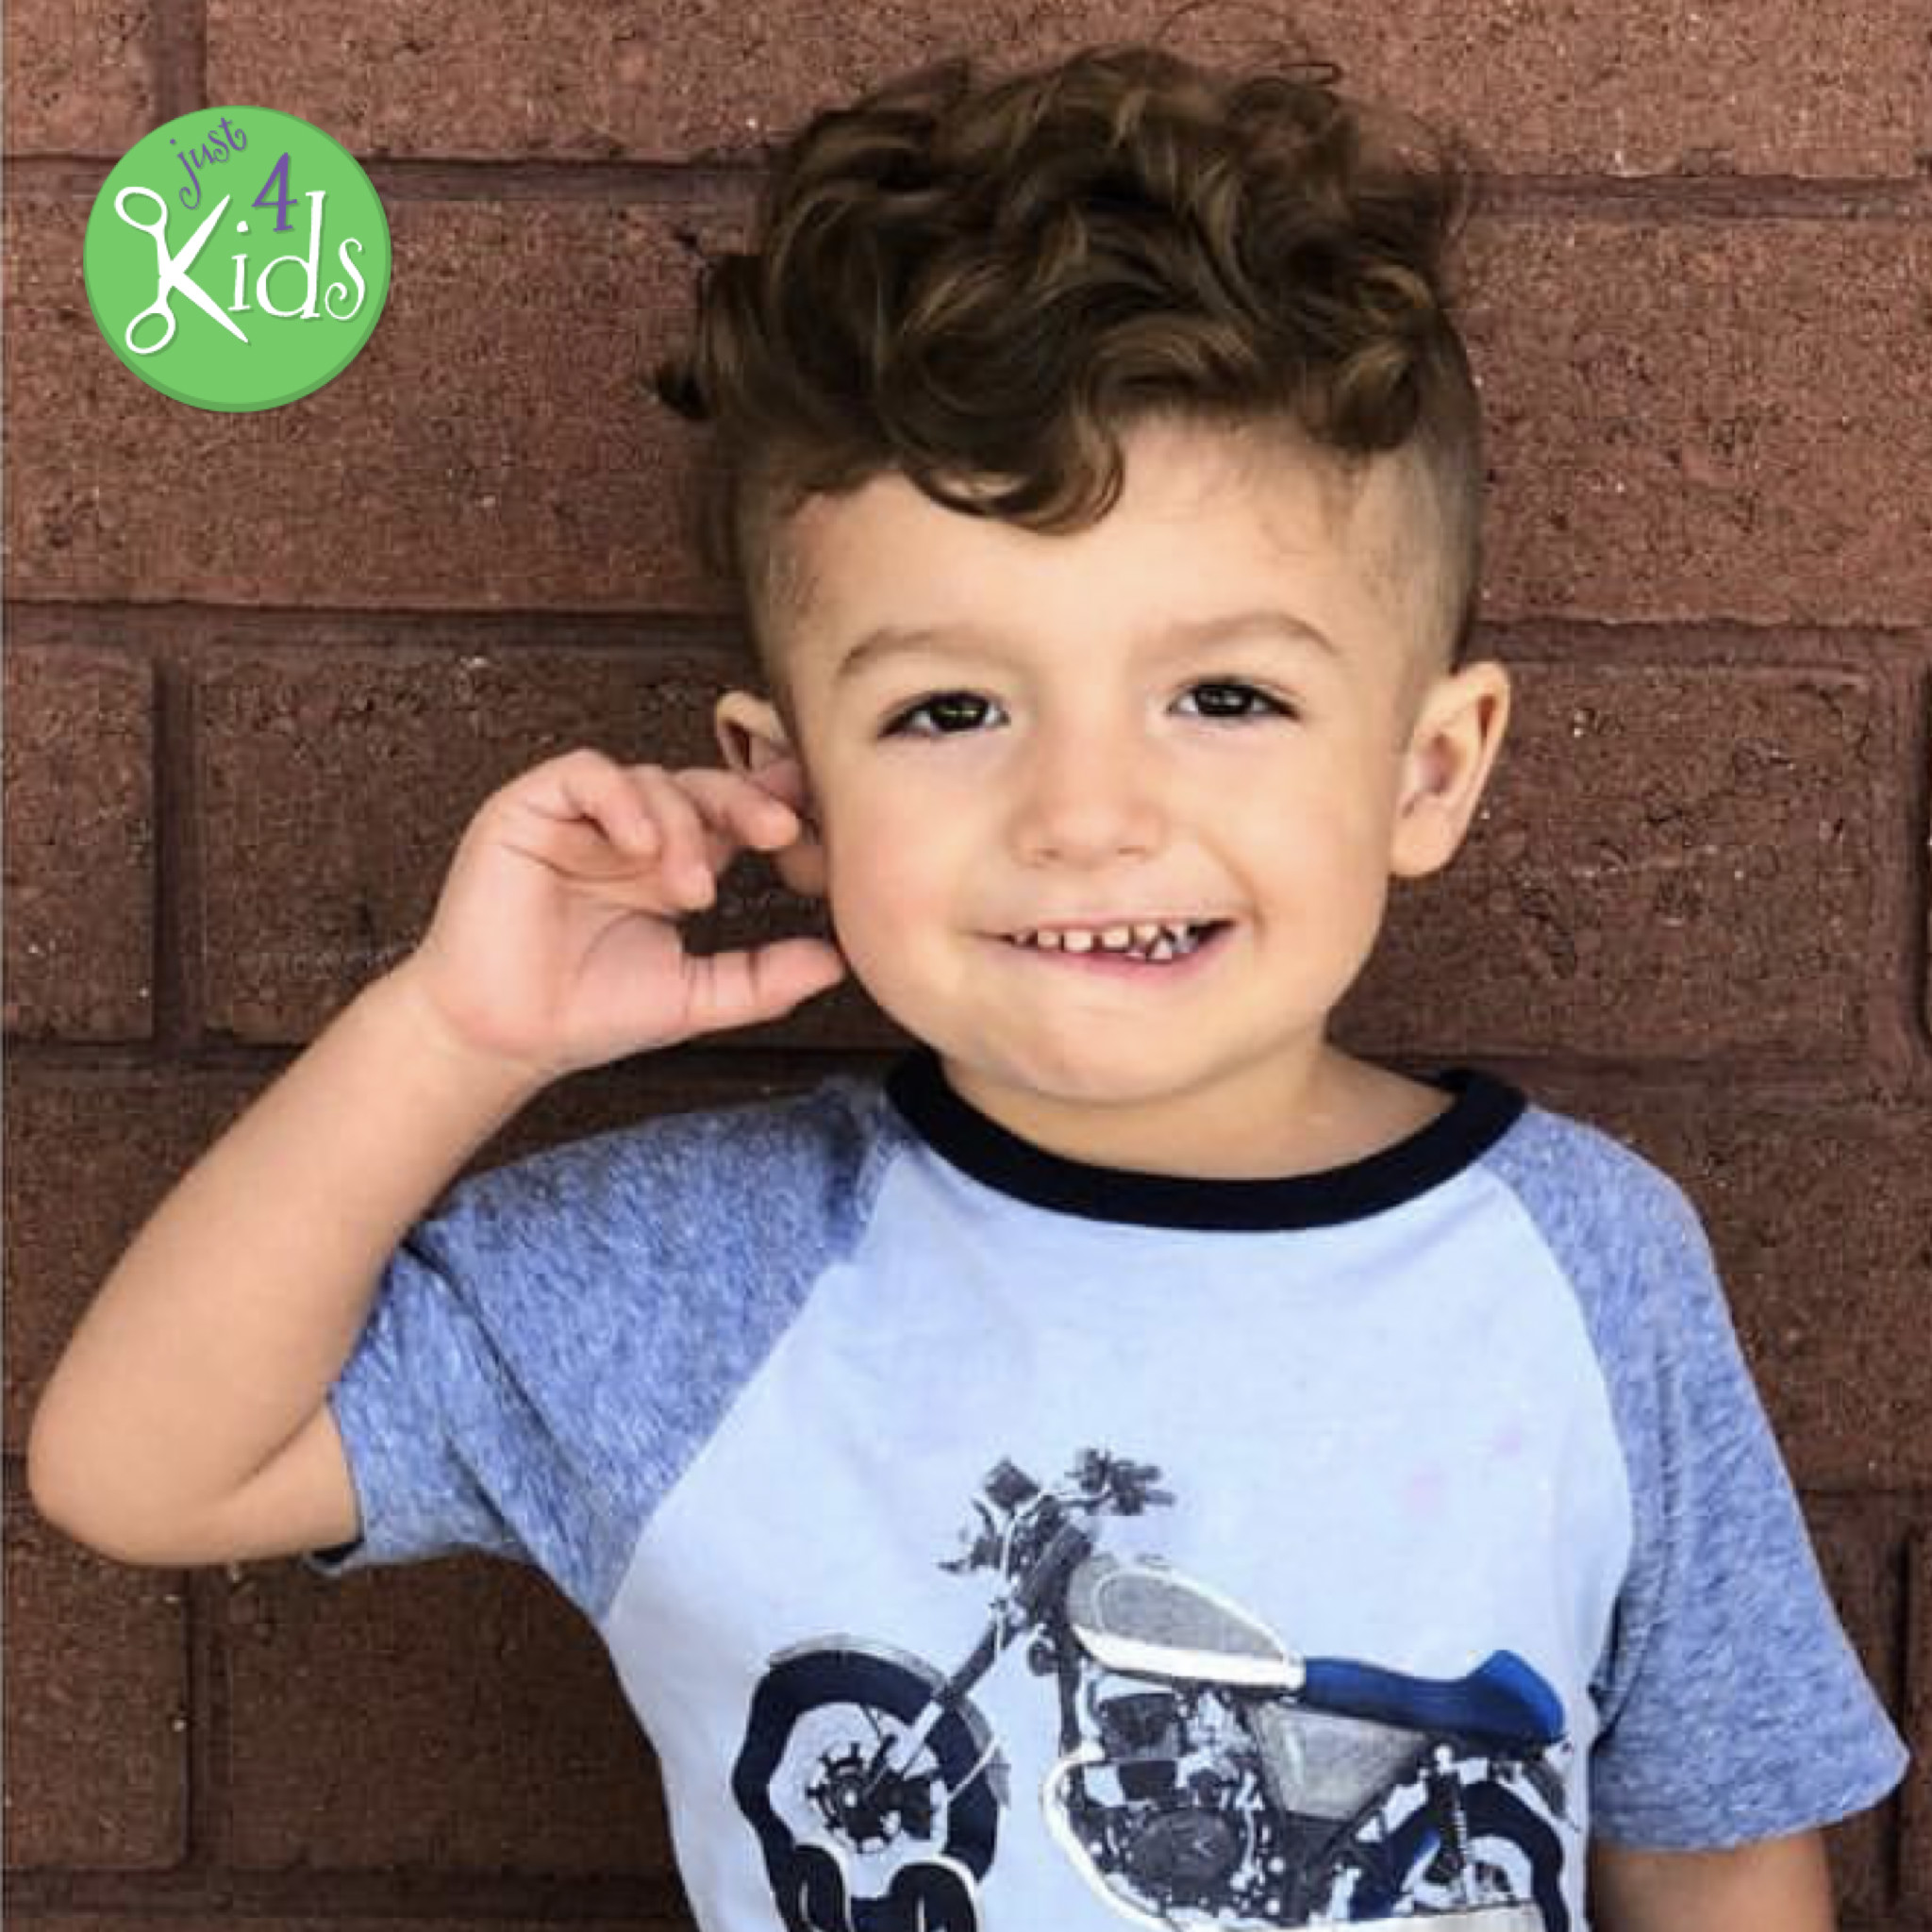 Curly Hair Toddler Boy Haircuts
 Top Kids Hairstyles 2018 Long Hairstyles for Boys Long